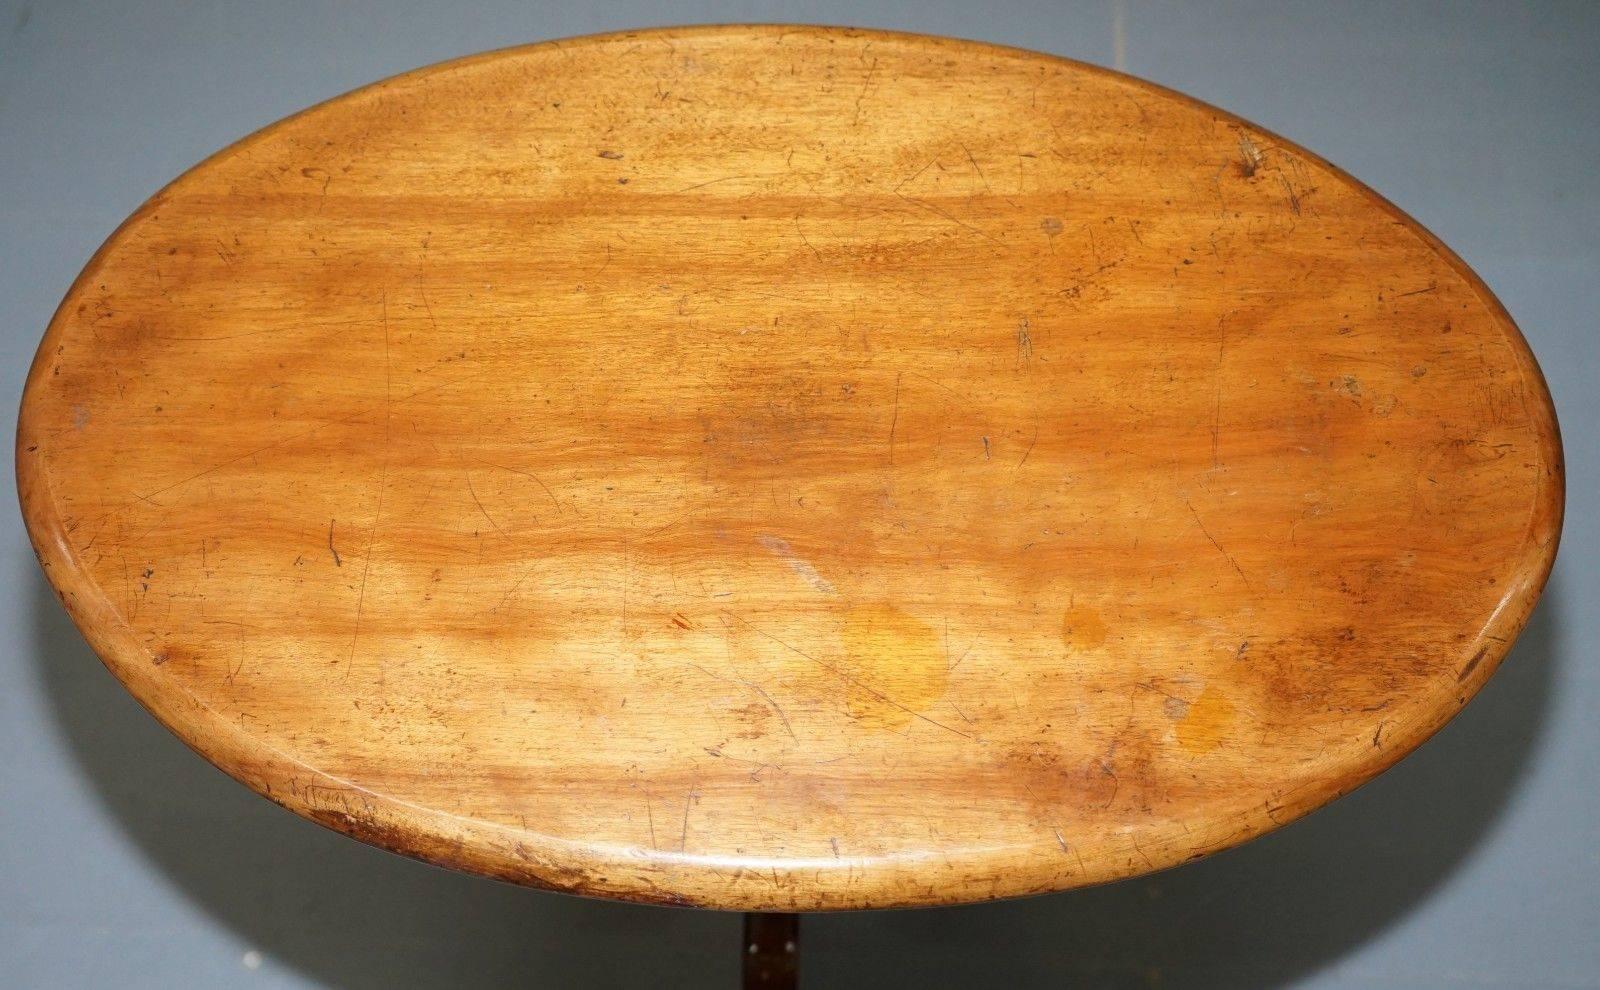 We are delighted to offer for sale this stunning Edwardian fruit wood oval side table

A very good looking and well made little side table with a nice vintage patina, we have cleaned waxed and polished it from top to bottom

The table is a